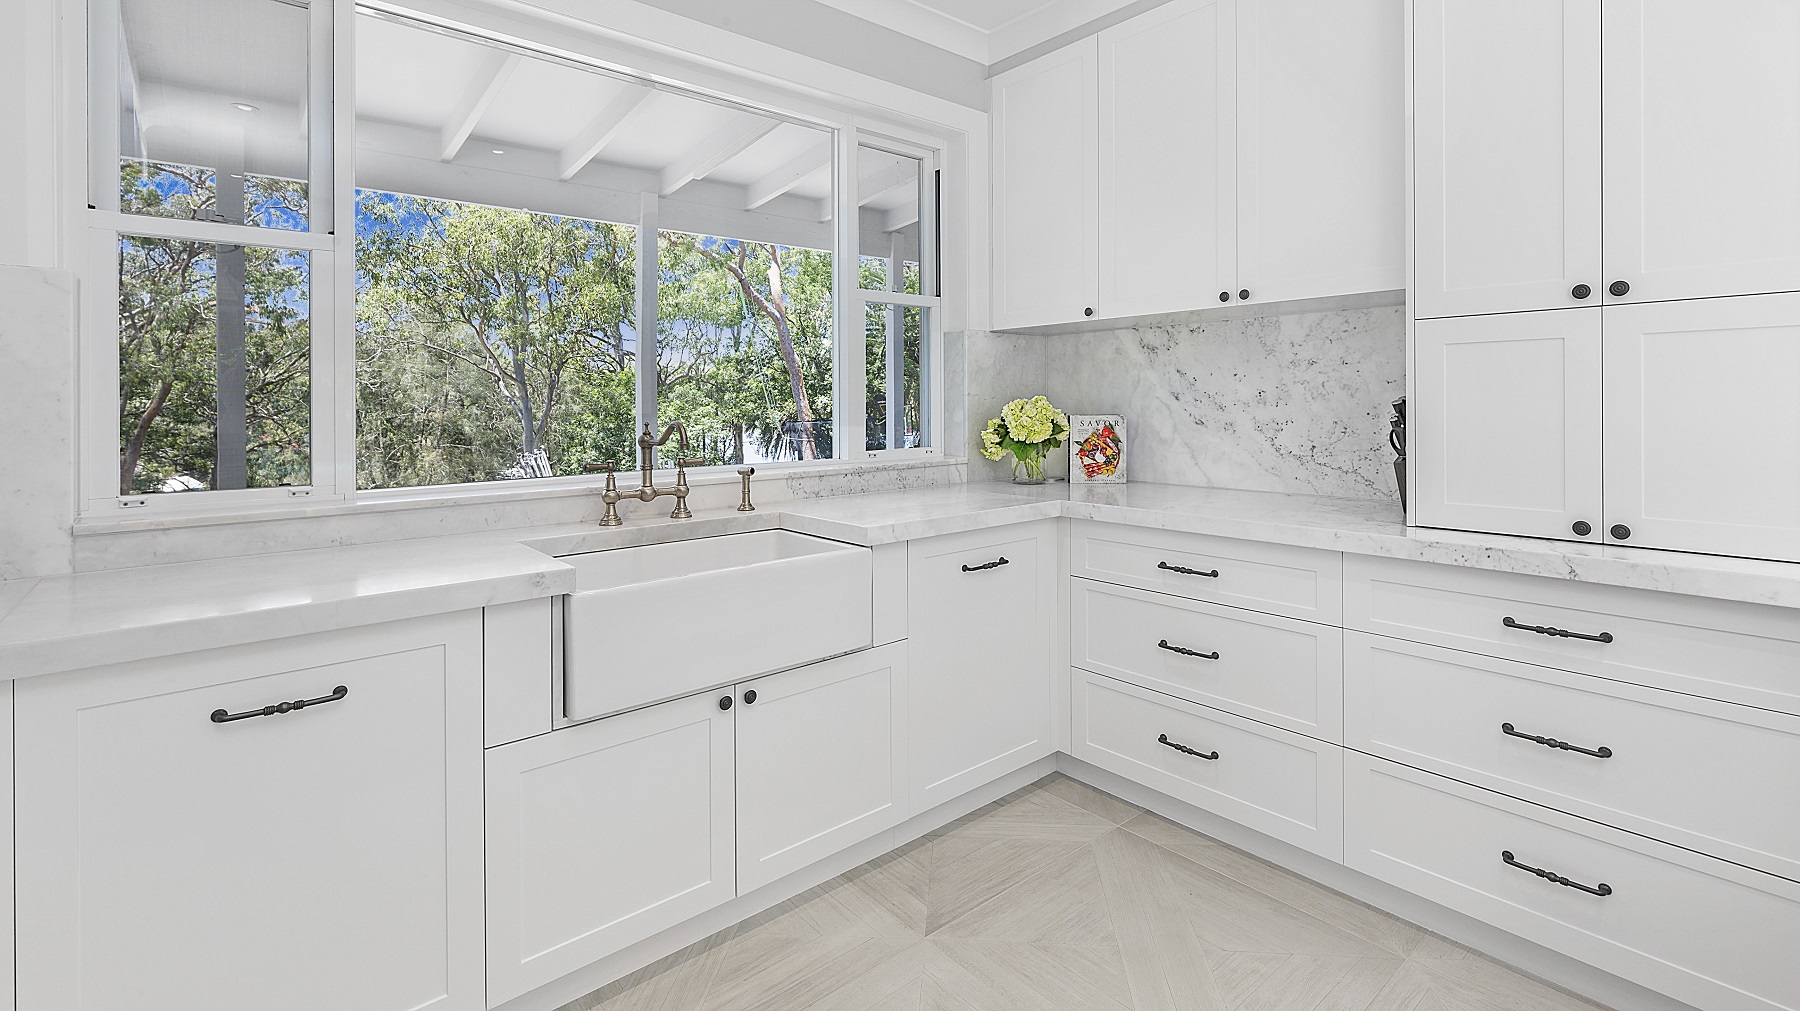 Oatley, Shaker style kitchen with a Carrara marble benchtop